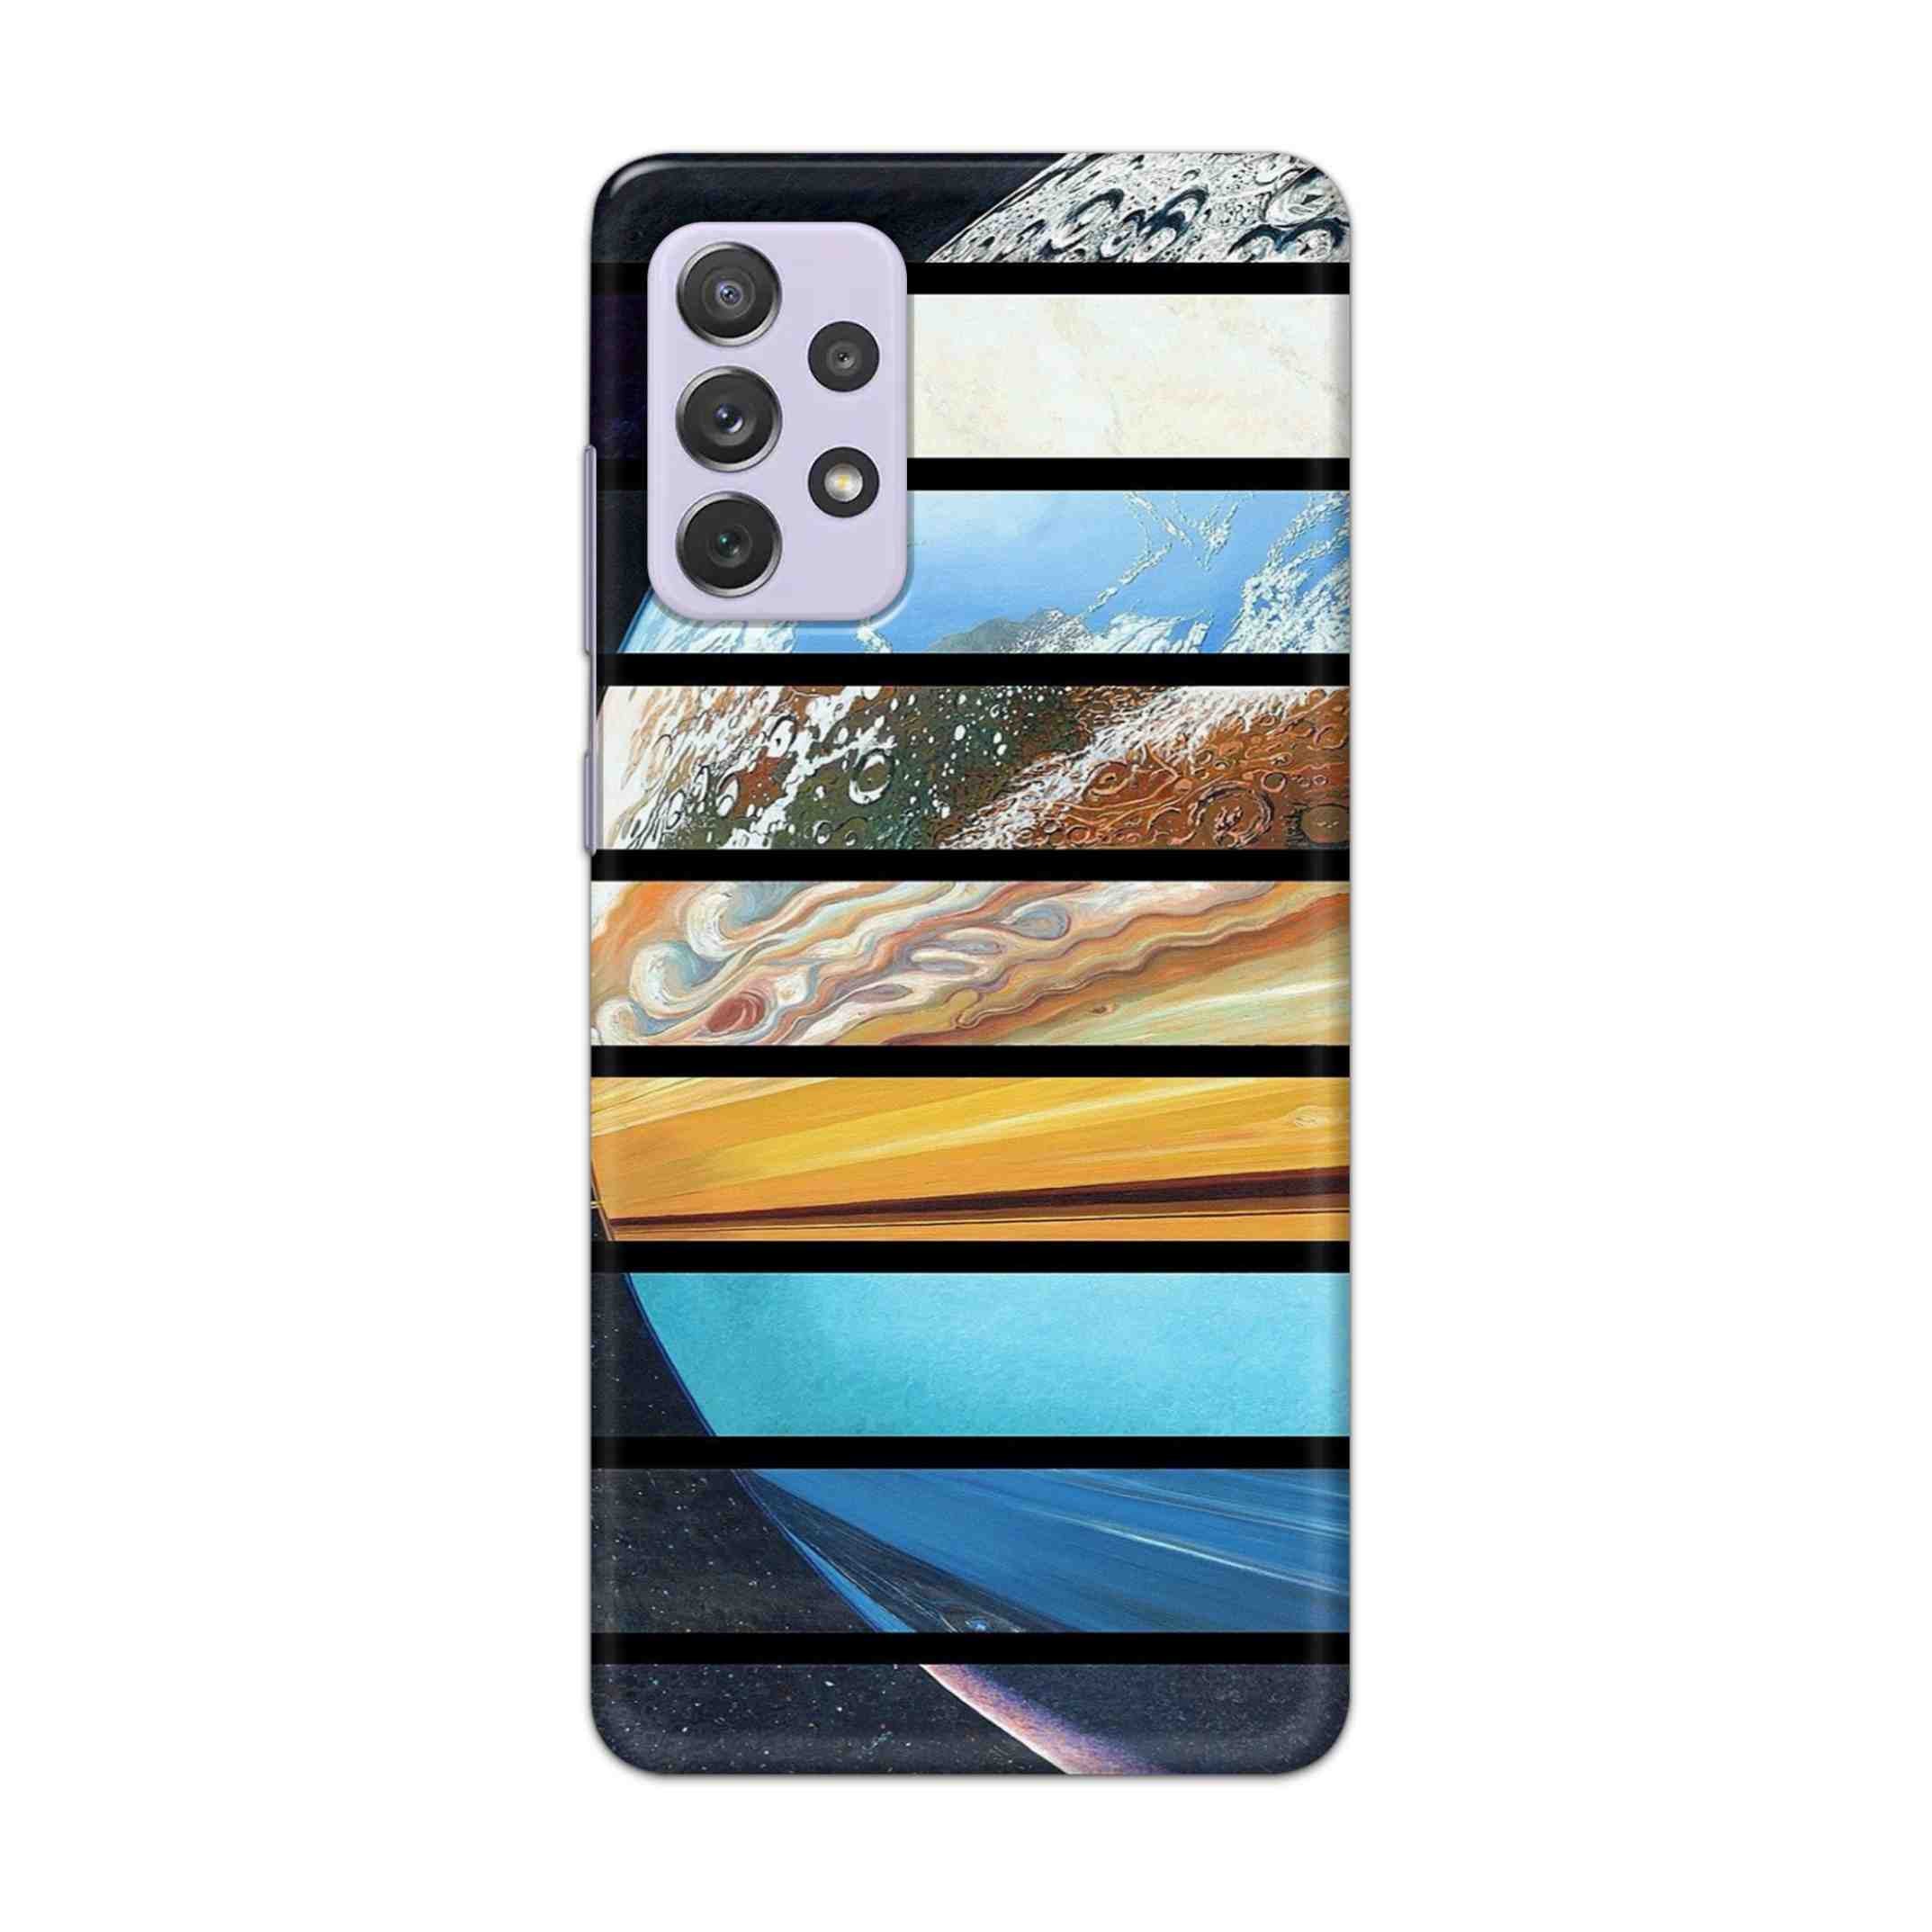 Buy Colourful Earth Hard Back Mobile Phone Case Cover For Samsung Galaxy A72 Online